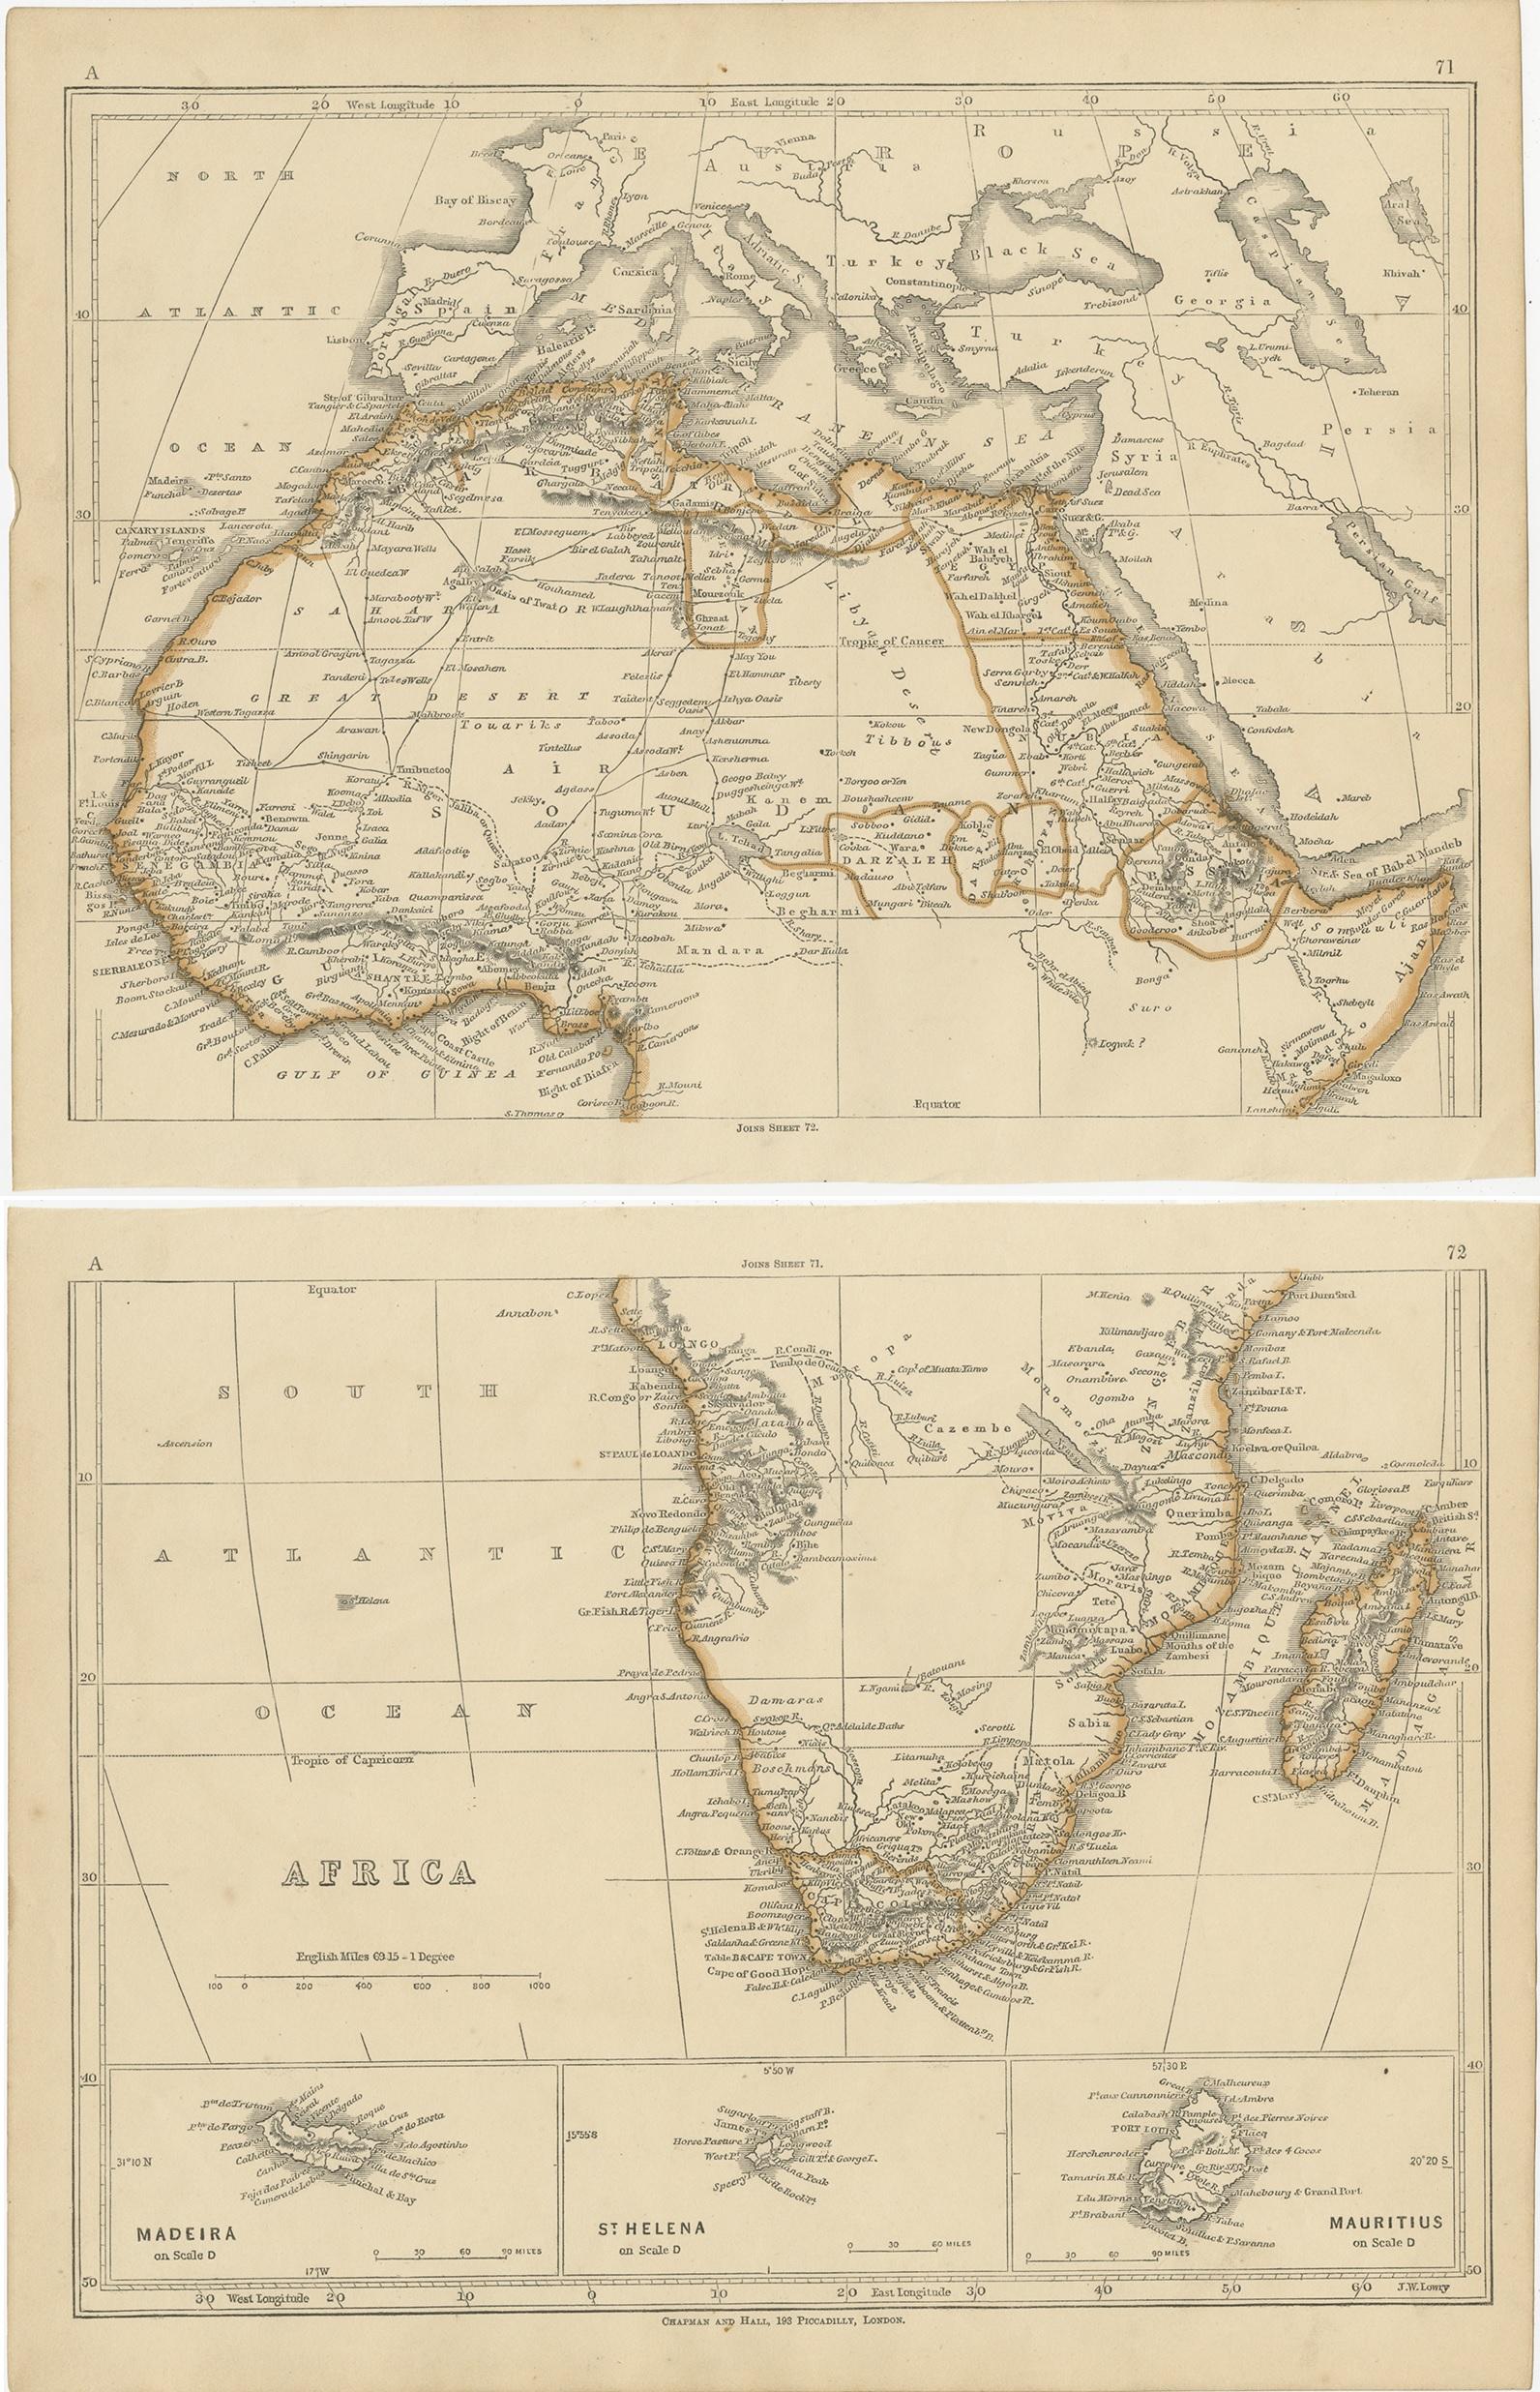 19th Century Antique Map of Africa by Lowry, 1852